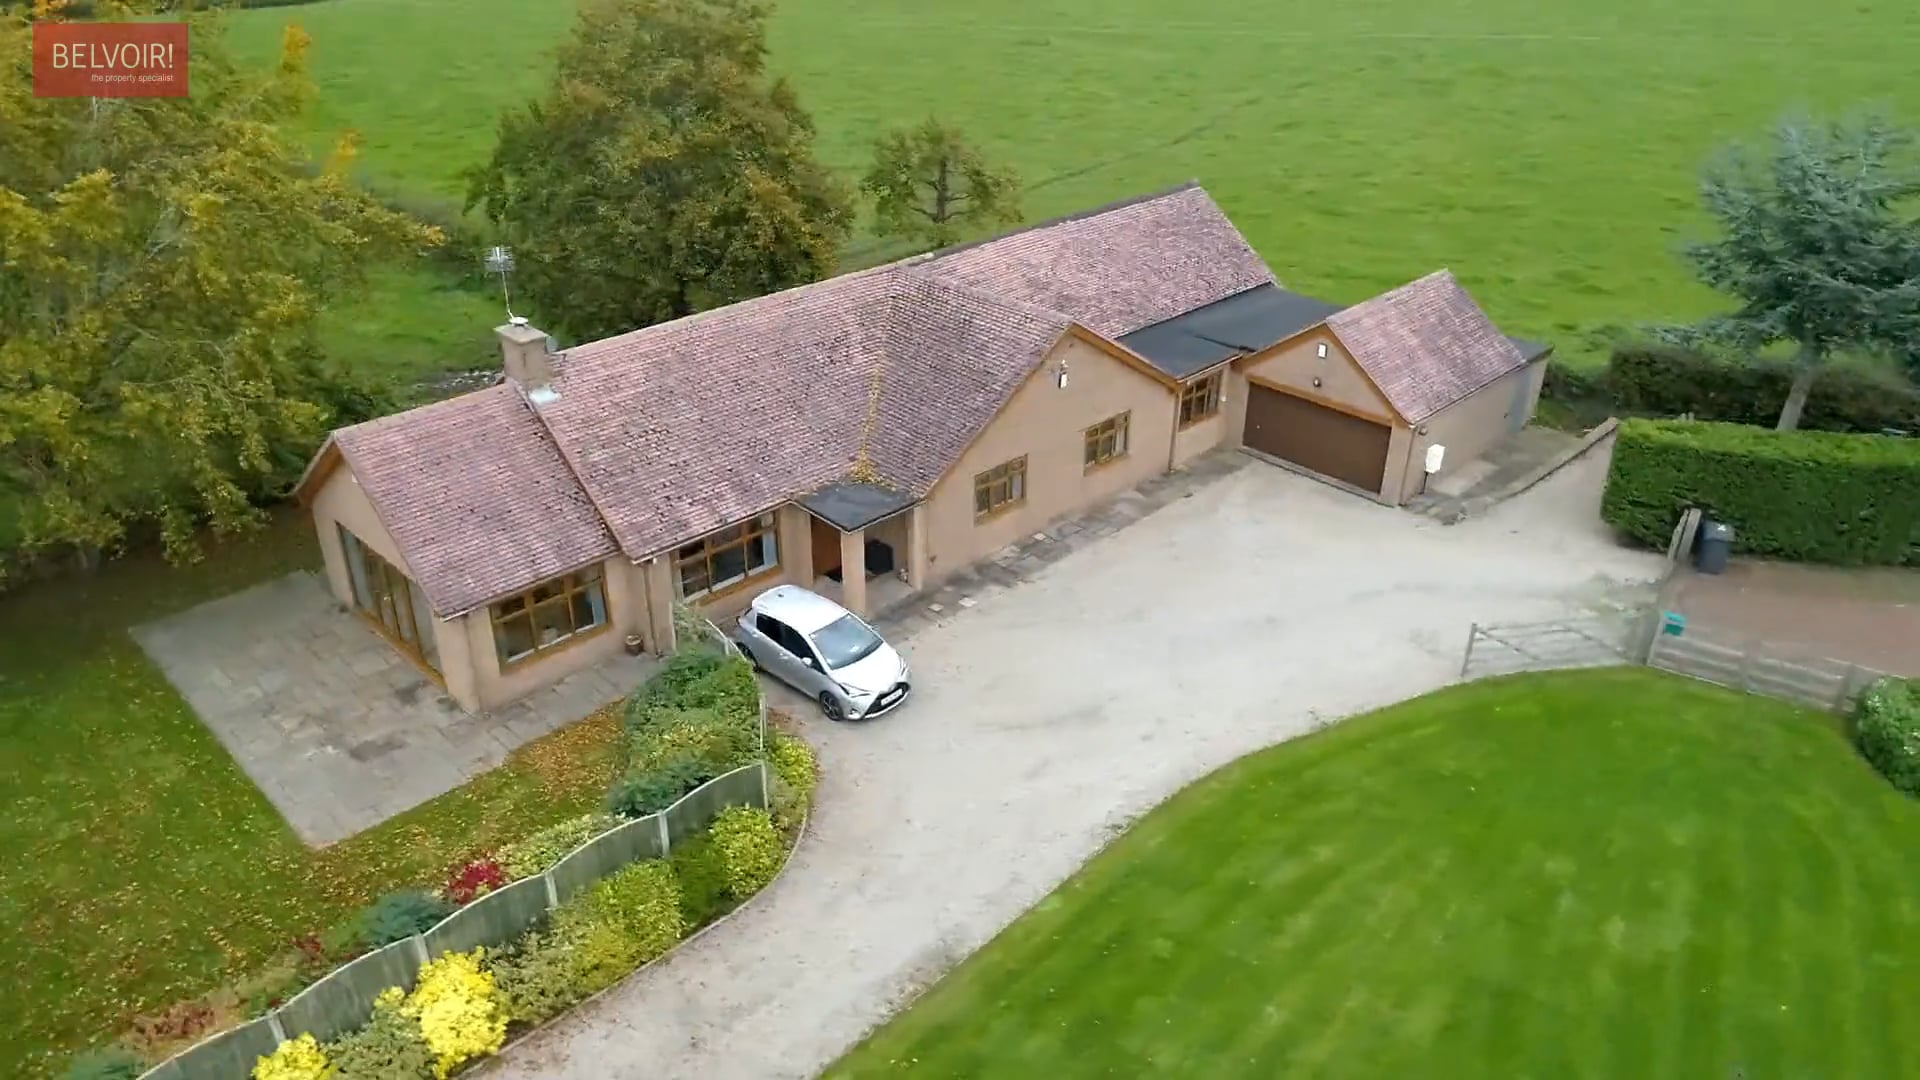 Foxwood - TV presenter-style property sale video including aerial images